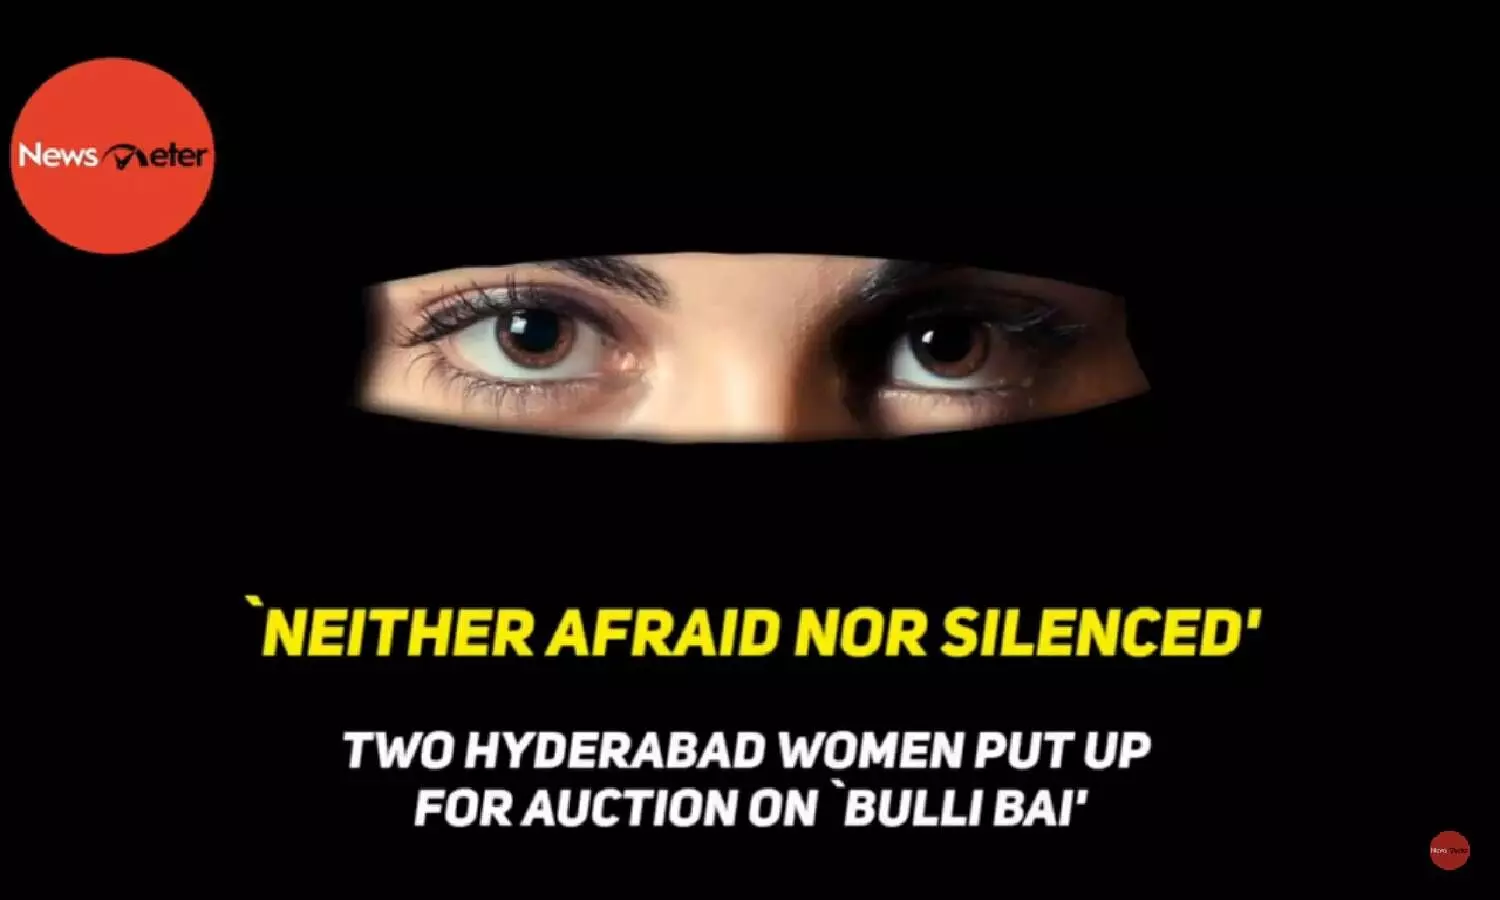 Two Hyderabad women put up for auction on bullibai